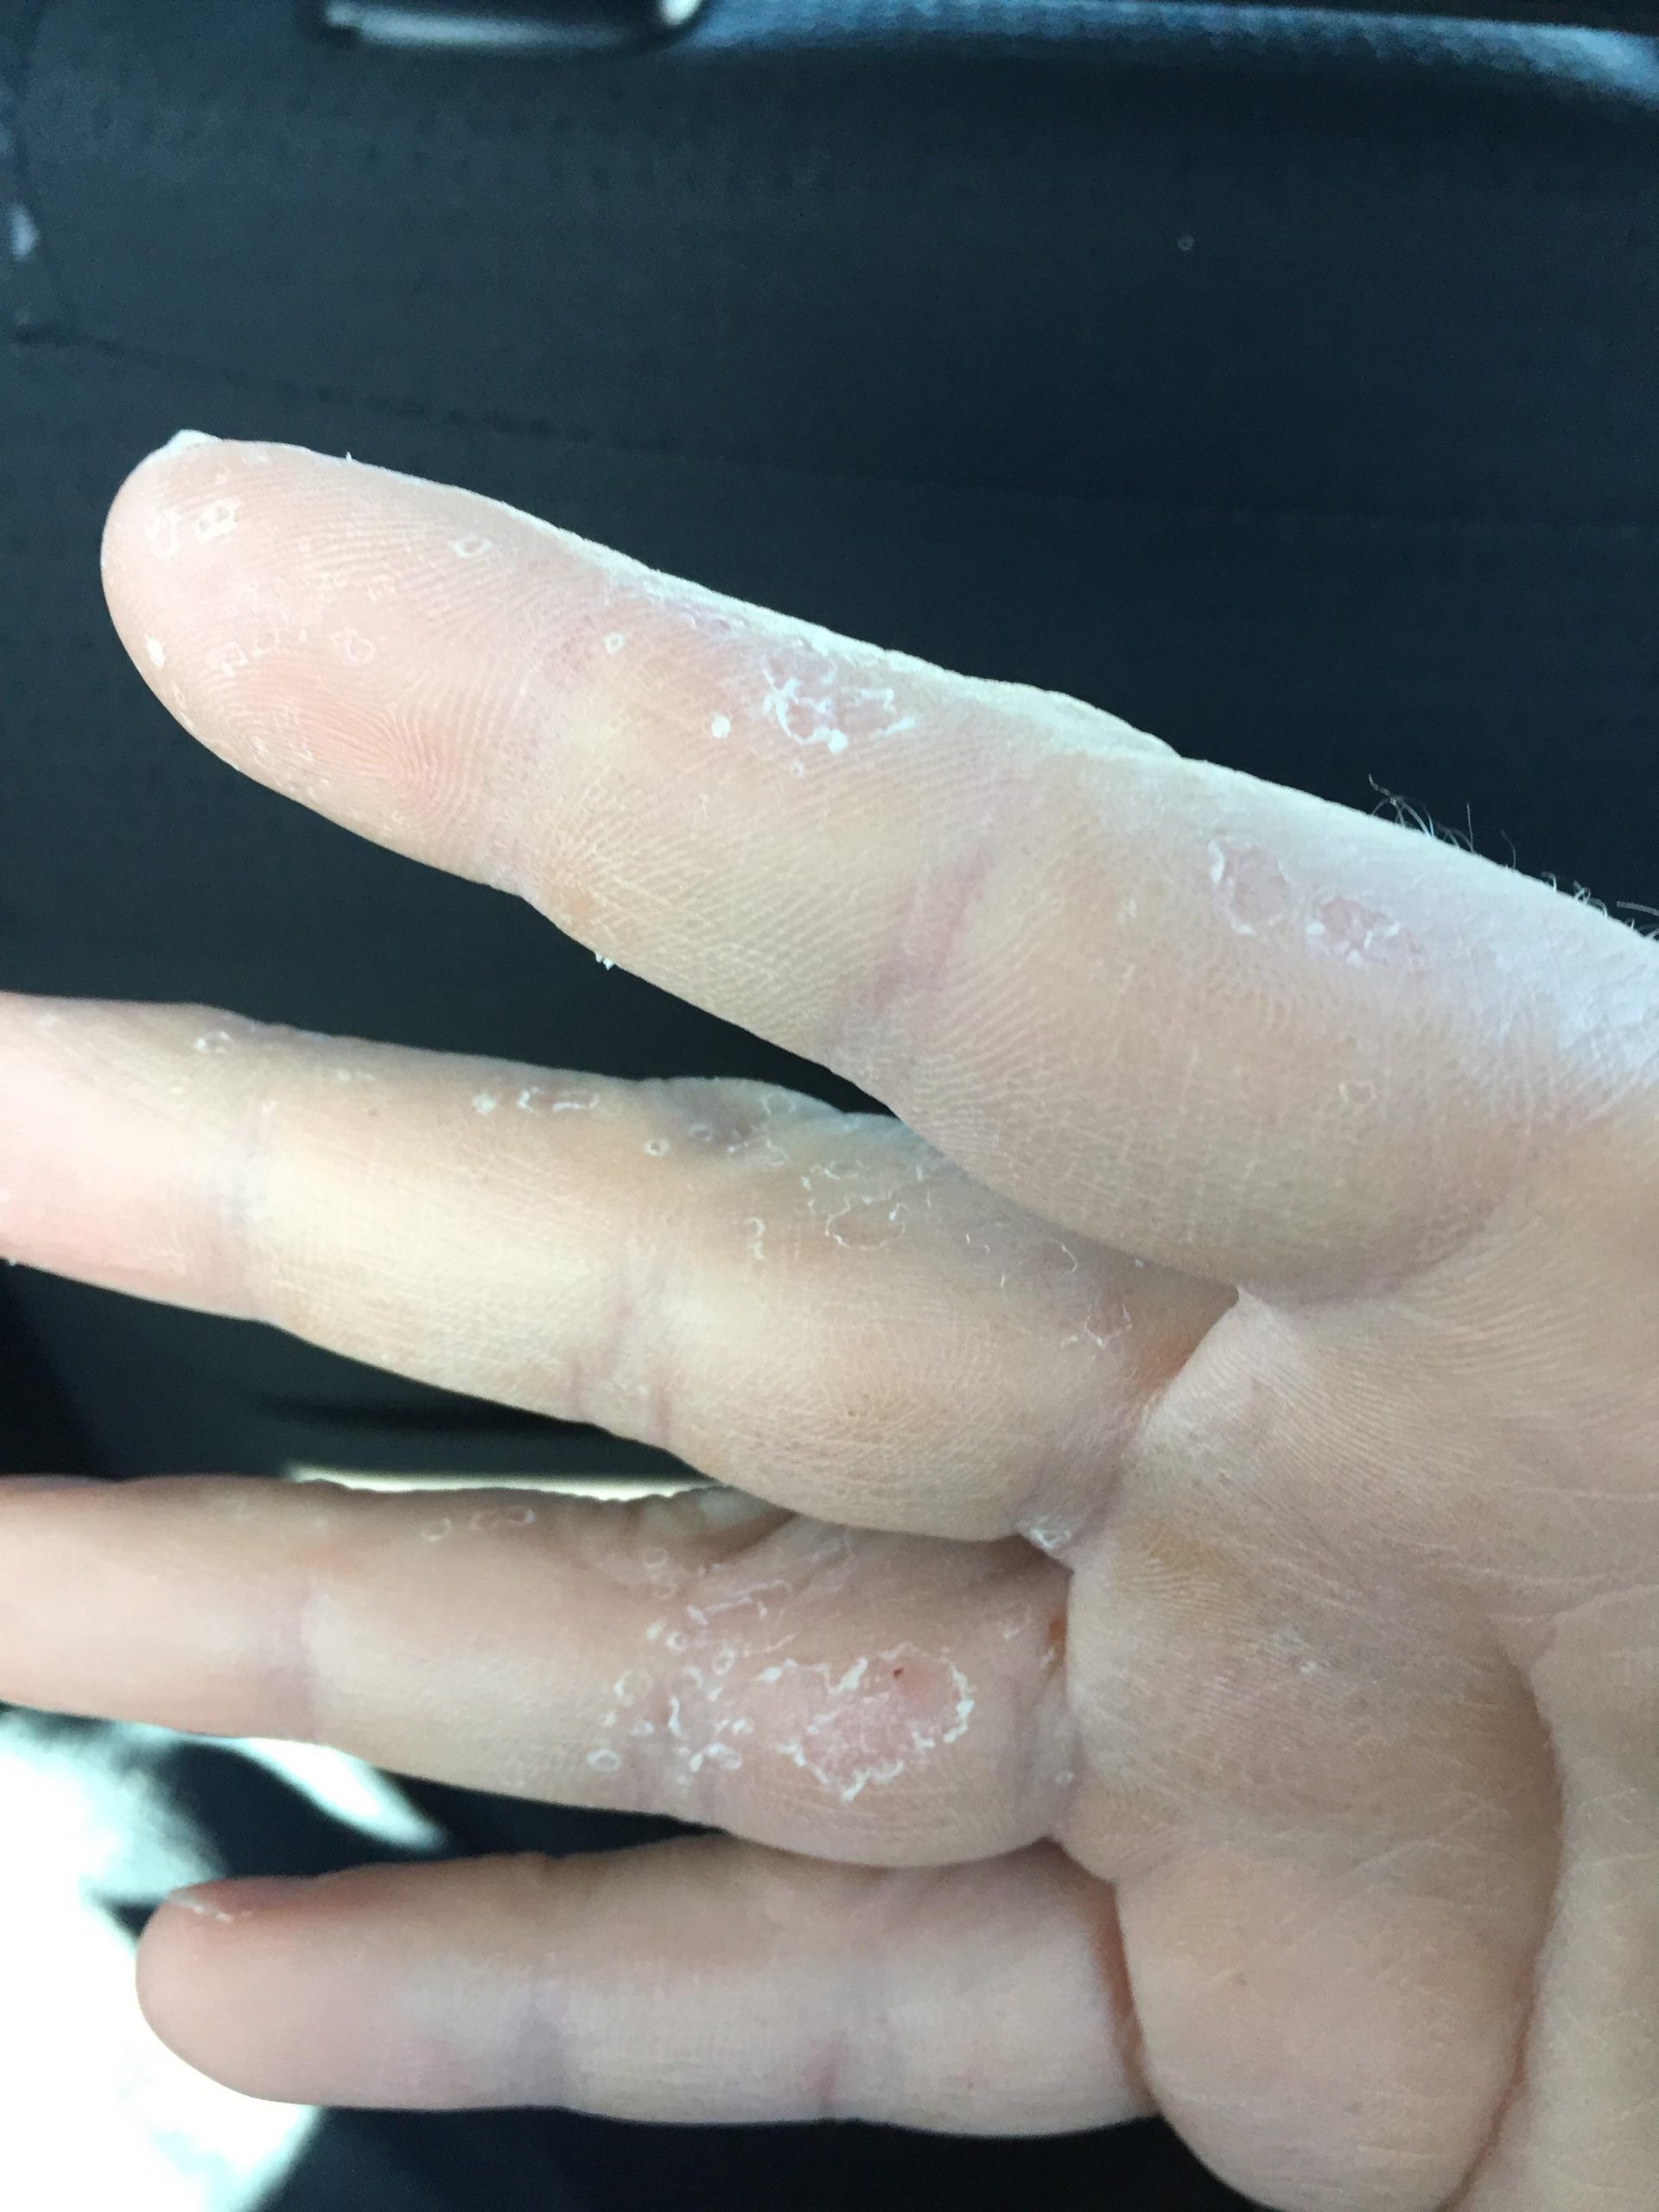 Update: dyshidrotic eczema is gone, but this is the aftermath : popping